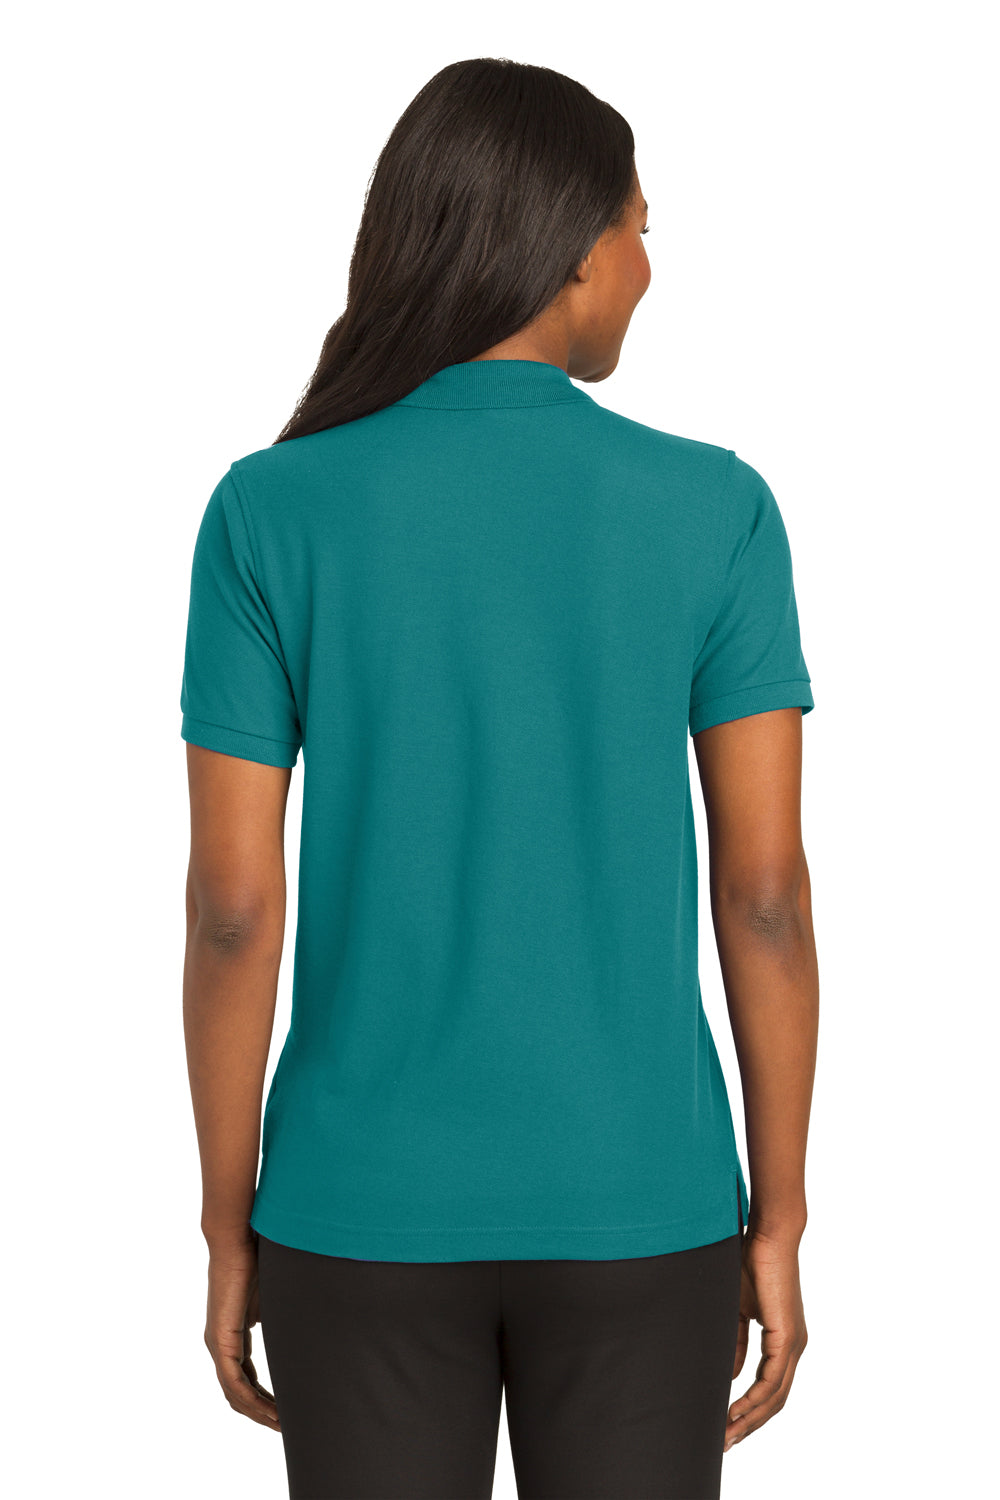 Port Authority L500 Womens Silk Touch Wrinkle Resistant Short Sleeve Polo Shirt Teal Green Back